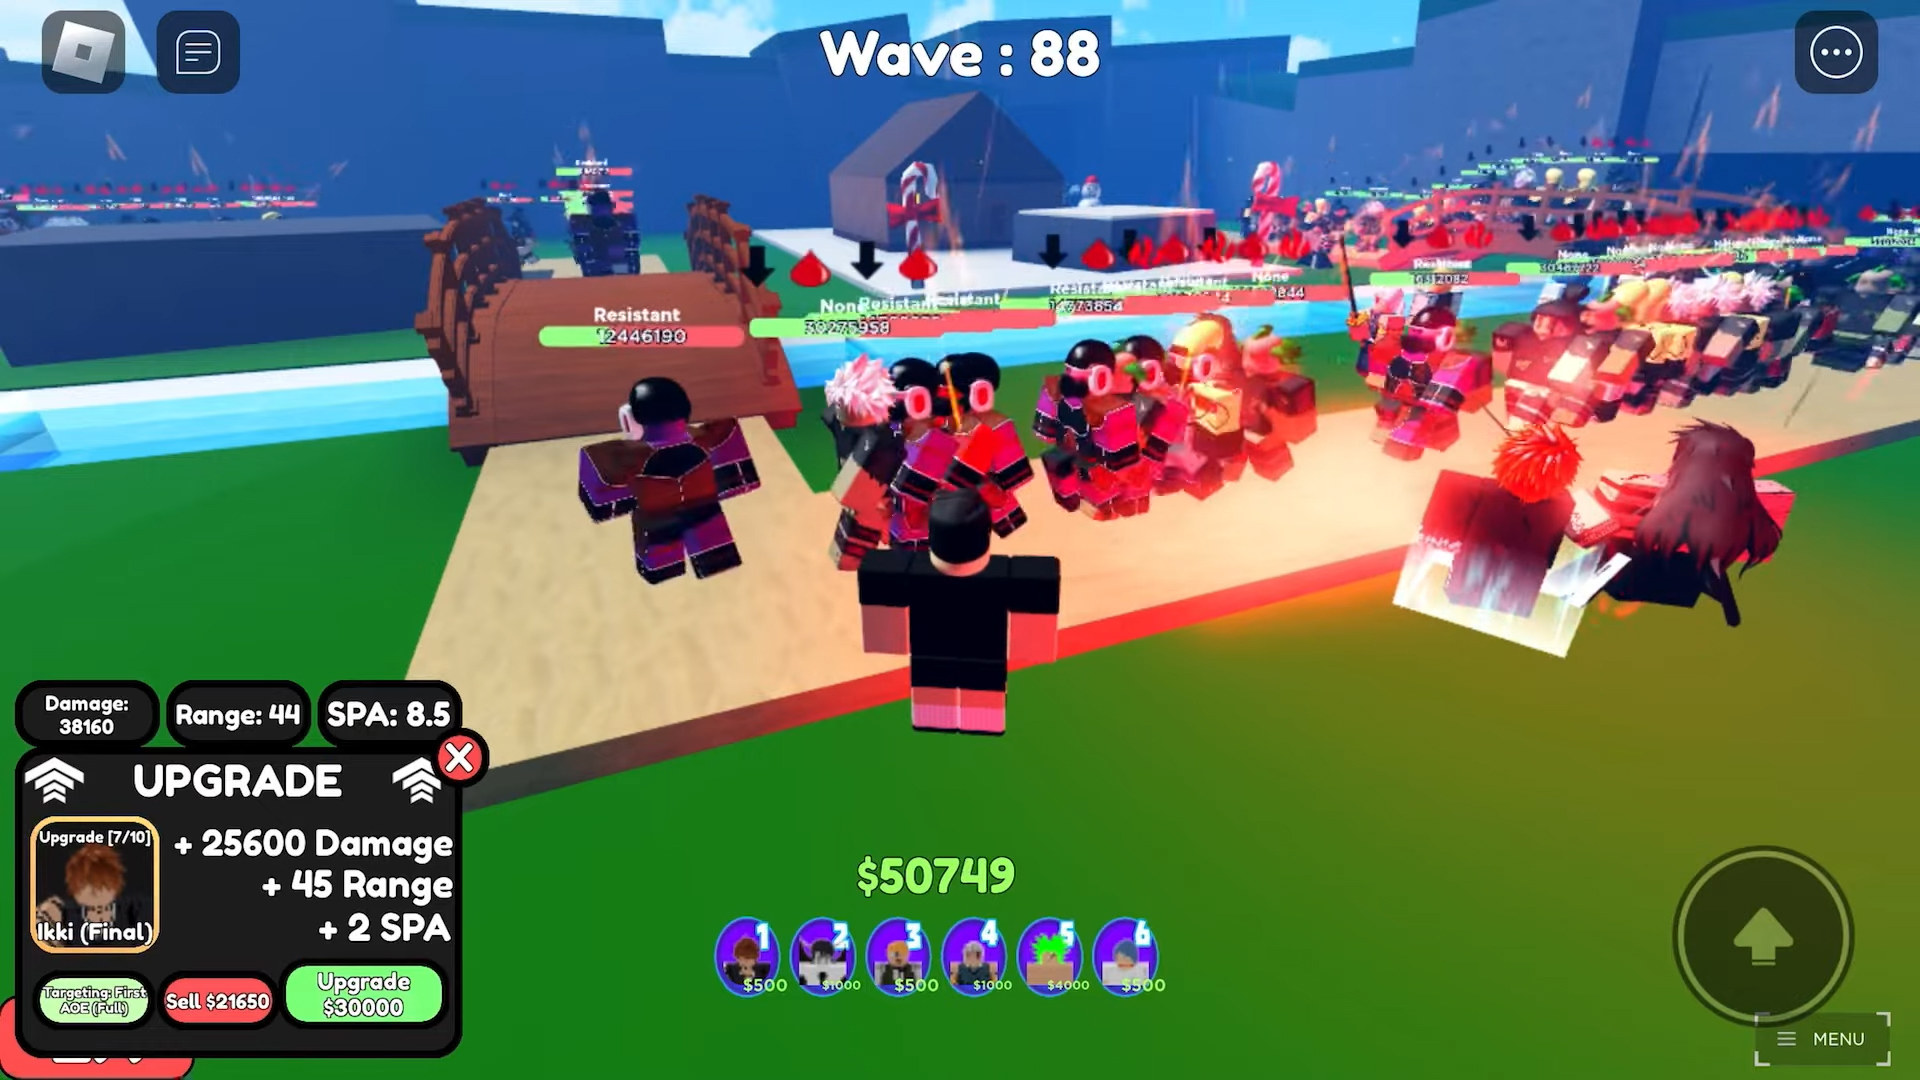 Find Everything You Need to Know About Roblox Final Tower Defense